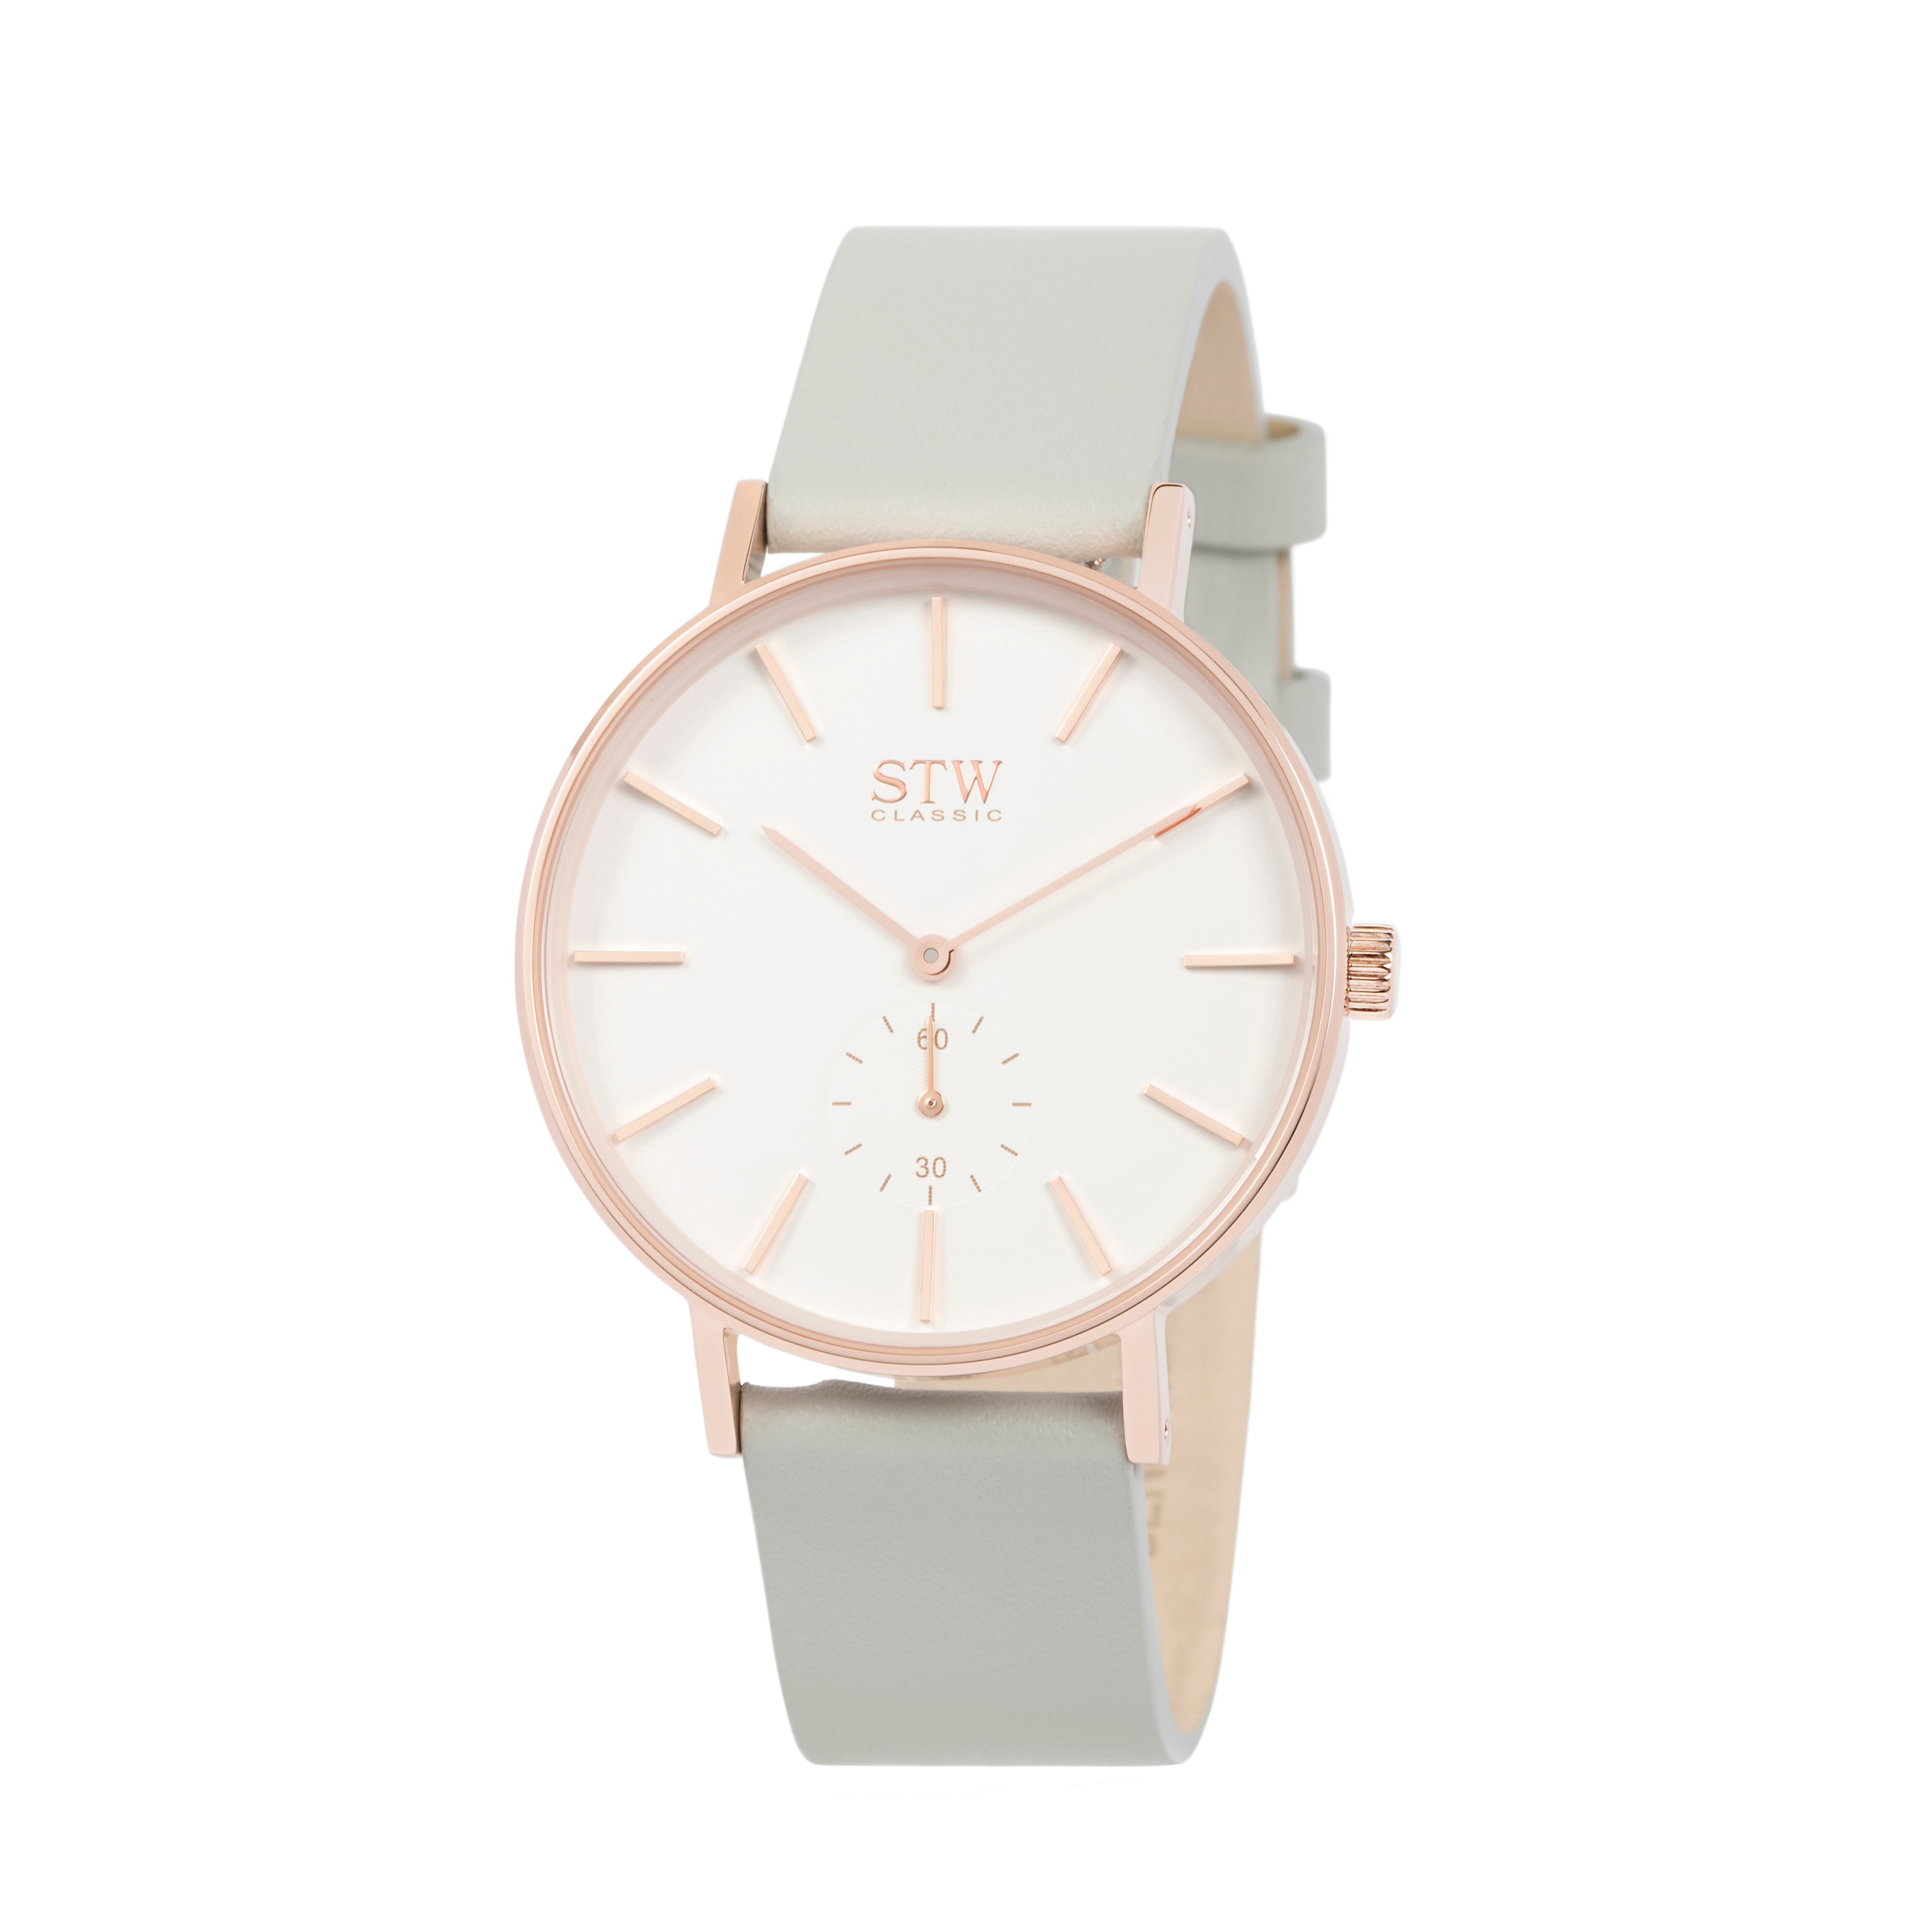 THE CLASSIC -  WHITE DIAL WITH GREY LEATHER STRAP WATCH